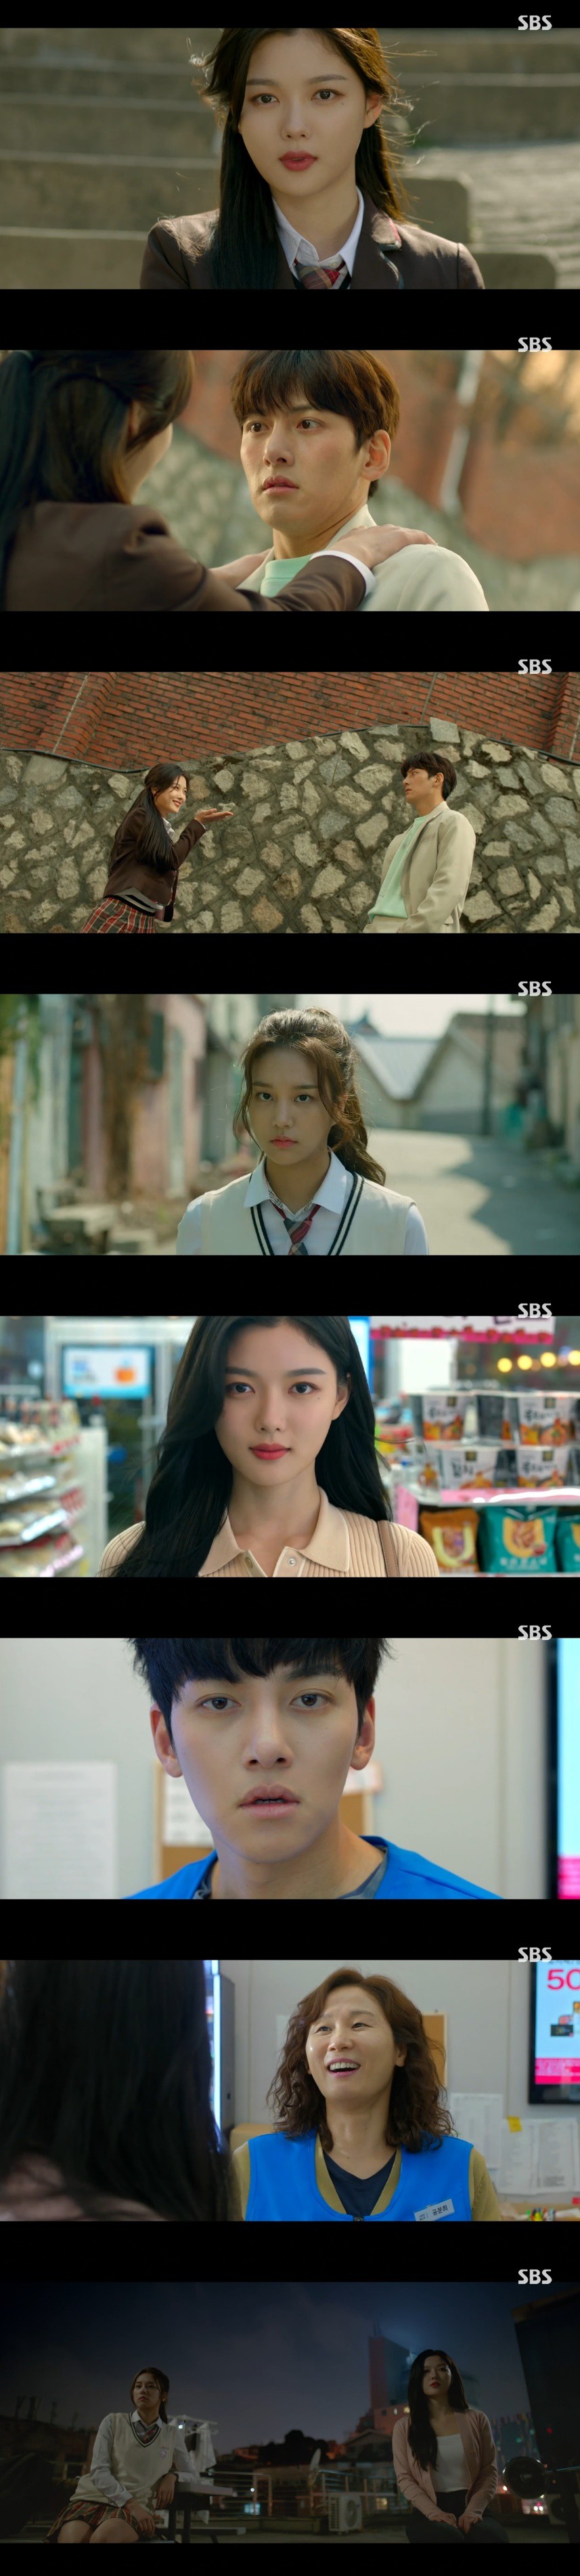 Kim Yoo-jung and Ji Chang-wook, Convenience store morning star, made The Slap as president and Alba.In the SBS drama Convenience store Morning Star, which aired on the 19th, the first intense meeting between Choi Dae-heon (Ji Chang-wook) and Kim Yoo-jung was broadcast.On this day, high school student Jung Sae-byeol gave a tobacco shuttle to Choi Dae-heon, who was pushed by friends.However, Choi Dae-heon did not go to hell, and instead of tobacco, he bought a silver band and advised, Get off if you want, cut off, cut off the bones.Being an adult and walking youth in a more wonderful job, he said.So, the star said, My brother is the first person to tell me to stop tobacco.The star picked up Choi Dae-heons number and said, Brother, be careful. I do not know what to do with my brother.Three years later, Choi Dae-heon quit the company and started a Convenience store franchise business.There are quite a few girls who are looking for a Convenience store to see Choi Dae-heons face, but all of them are small and there are no other customers.Choi Dae-heons family helped the Convenience store work, but the problem grew with Choi Yong-pil (Lee Byung-joon) hurting his arm.Choi Dae-heon, who worked on the Convenience store for two nights, eventually wrote Alba Recruitment on the door of the store.And a star of the morning appeared in front of Choi Dae-heon: I came to see an Alba interview.Soon Choi Dae-heon recognized the star that had made the tobacco shuttle in the past and decided to send it back as soon as possible.However, Choi Dae-heon fell asleep while the star went to the bathroom for a while, and the star did the Convenience store work.Even the star was good at it. Choi Dae-heon was forced to hire an Alba intern by being dragged into the star.But soon came something: Choi Dae-heon suspected a good morning star when money went from a can to a visa.Choi Dae-heon was frustrated that the star did not receive a phone call, and went to the house of the star on the resume.However, at the address where the star was small, a prostitution trap investigation was taking place.Choi Dae-heon, who was arrested at the scene, was only able to be released after showing the resume of the star.The star that I was looking for was in the Convenience store.Choi Dae-heon, who heard this from his mother, Gong Bun-hee (Kim Sun-young), was worried that he was robbed of the Convenience store tobacco after the money.Choi Dae-heon confirmed that Tobacco was okay, but was relieved that I almost did not come to this timing.At this time, the police who met at the Convenience store visited earlier.Police asked what happened and said, Alba just ran away because he stole 500,000 won.I took the money that my mother had to spend urgently, said Jeong Sae-byeol, who learned that she was misunderstood as a thief.And I dont always have to be part of a family history. Youre just like everyone else. Youre not listening. Its okay.I do not do this once or twice. After that, Jung Sung-sung cracked down on his brother, Jung Eun-bum (Solvin), who plays poorly, and lamented, Even if you and I do the same thing, we are more suspicious and cursed.The next day, the star went to work at the Convenience store. Choi Dae-heon recommended a beef lunch box to the star, replaced the cleaning, and replaced the sorry heart.Choi Dae-heon said, How do you not doubt that the money has disappeared on the first day of your visit?I do not want to be angry, but I have to apologize, said Choi Dae-heon, who apologized immediately.The star forgave Choi Dae-heon coolly.Choi Dae-heon was in a relationship with head of the headquarters, Yoo Yeon-ju (Han Seon-hwa), who had an evening appointment with Yoo Yeon-ju, and Choi Dae-heon waited anxiously for the star.I was delighted to see the manager and I was soaking perfume, said Choi Dae-heon, who poured cold water on his girlfriends presence.Jung Sang-bum, who straightened his face, gave a meaningful warning that I am sorry to the woman Friend because I will see him every day and fall in love with me and my affection will cool down.The star saw off Choi Dae-heon with a smile.Choi Dae-heon regretted: I shouldnt have informed the morning star of the day of the performance of Mr.Choi Dae-heons Friend Han-sik (Pinson of Eummunseok) called Choi Dae-heon and reported that Alba calls the Friends and takes the night.The star was playing with the friends in front of the Convenience store.Choi Dae-heon was furious, saying, How dare you put a straw in my Convenience store?The star was delighted and laughed when Choi Dae-heon, who had gone on a date, appeared in front of him.